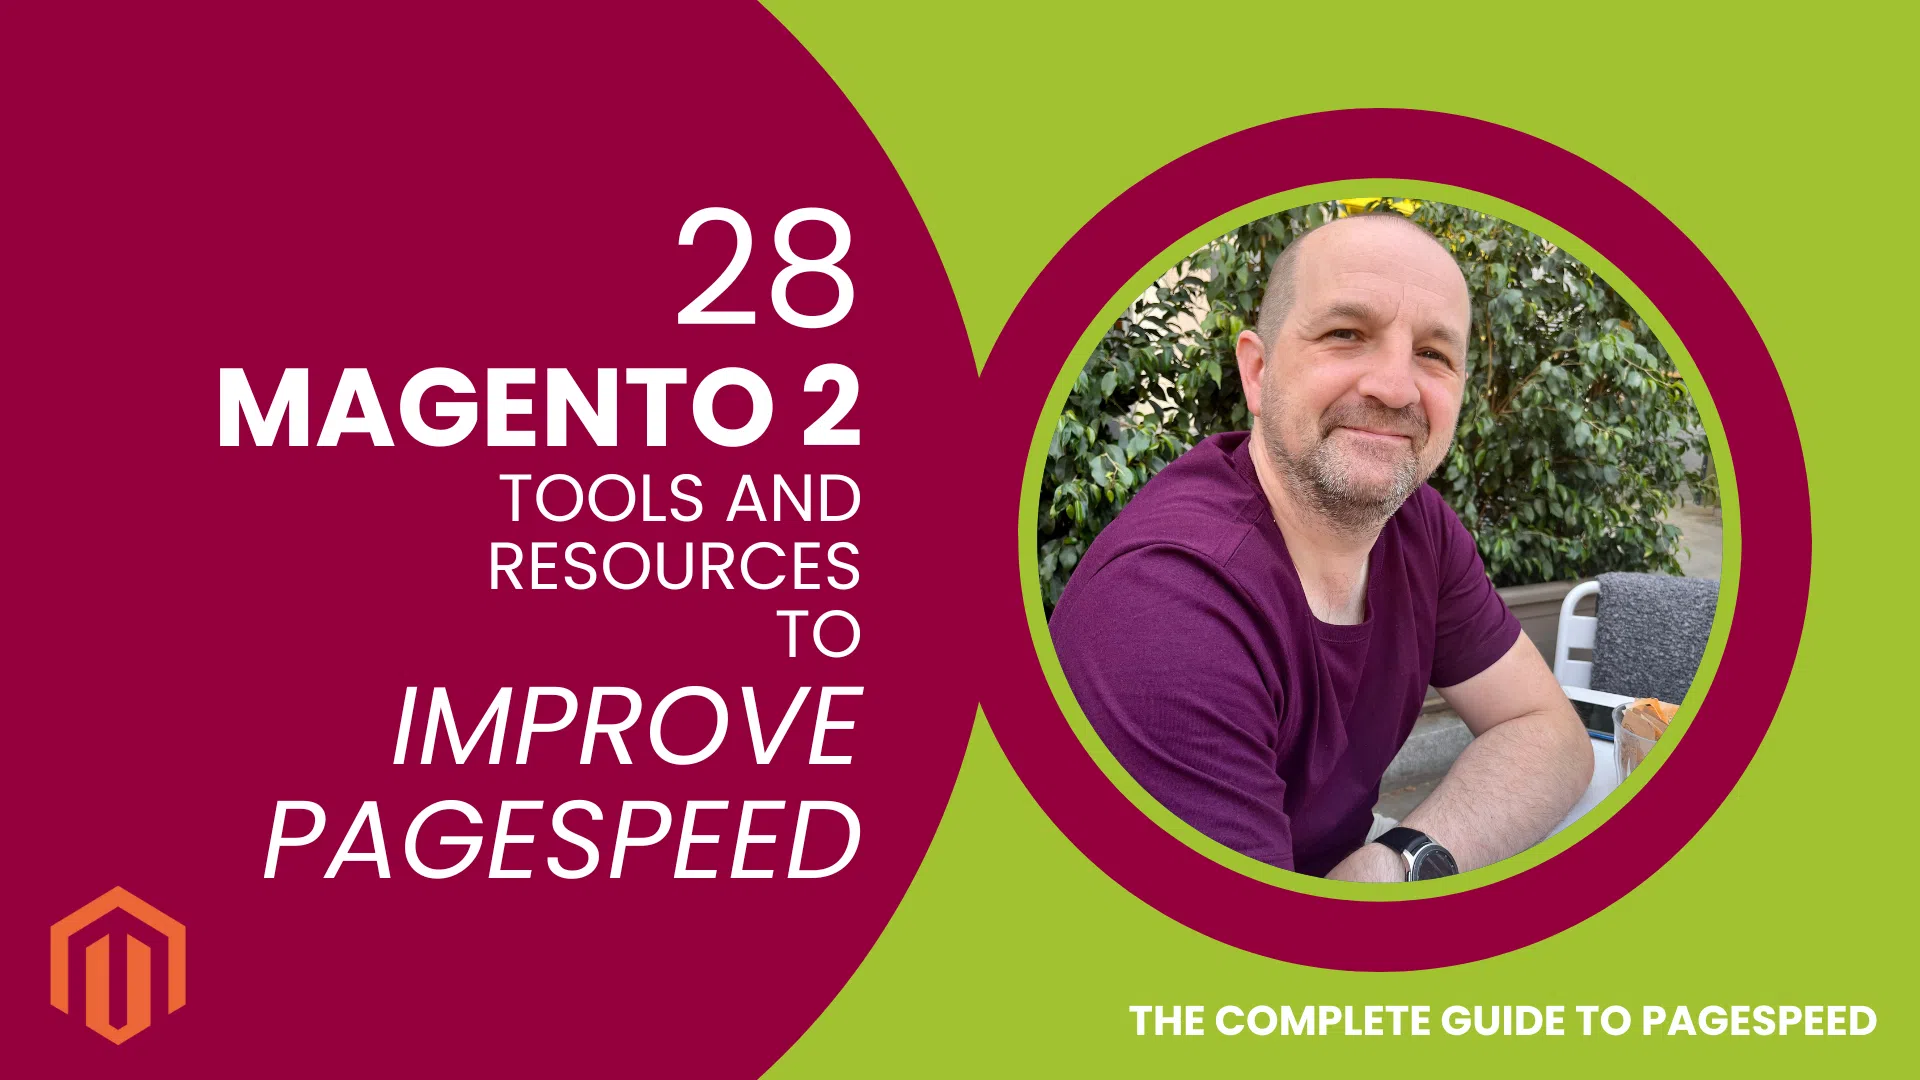 28 Magento 2 Tools and Resources to Improve Pagespeed